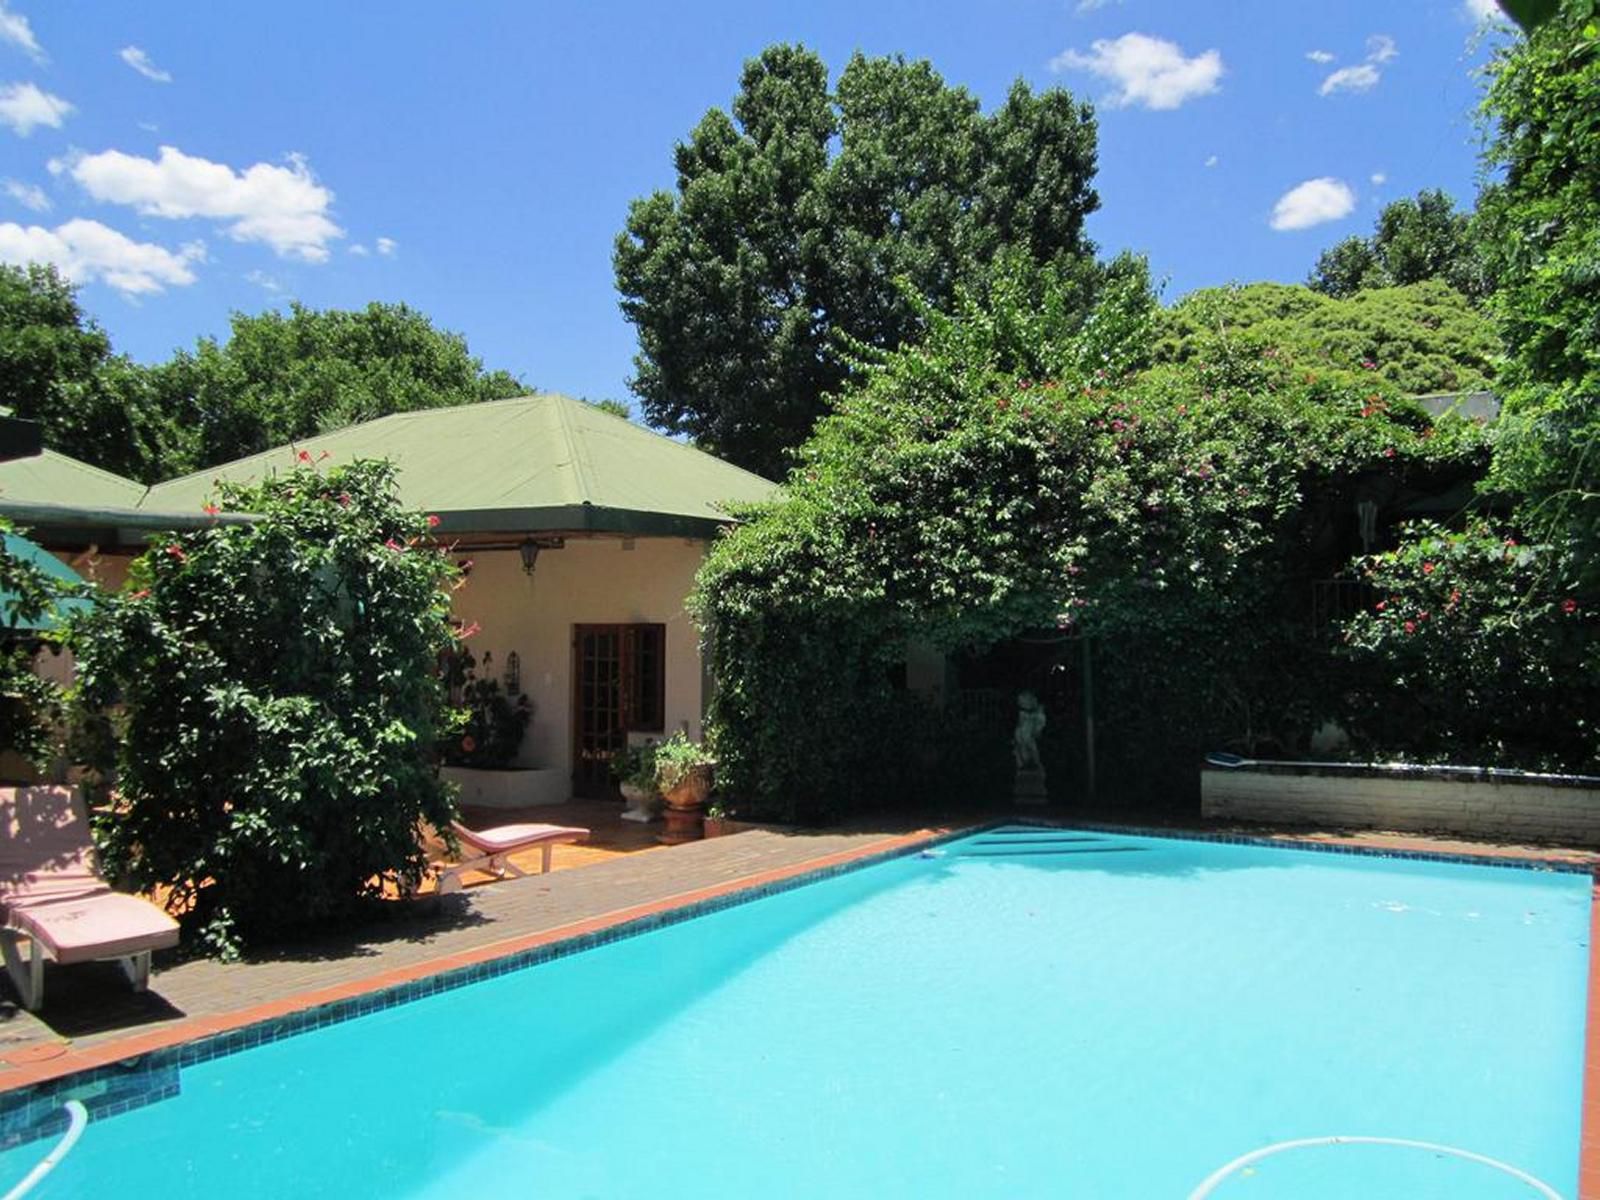 Village Green Guest House Parkview Johannesburg Gauteng South Africa House, Building, Architecture, Garden, Nature, Plant, Swimming Pool